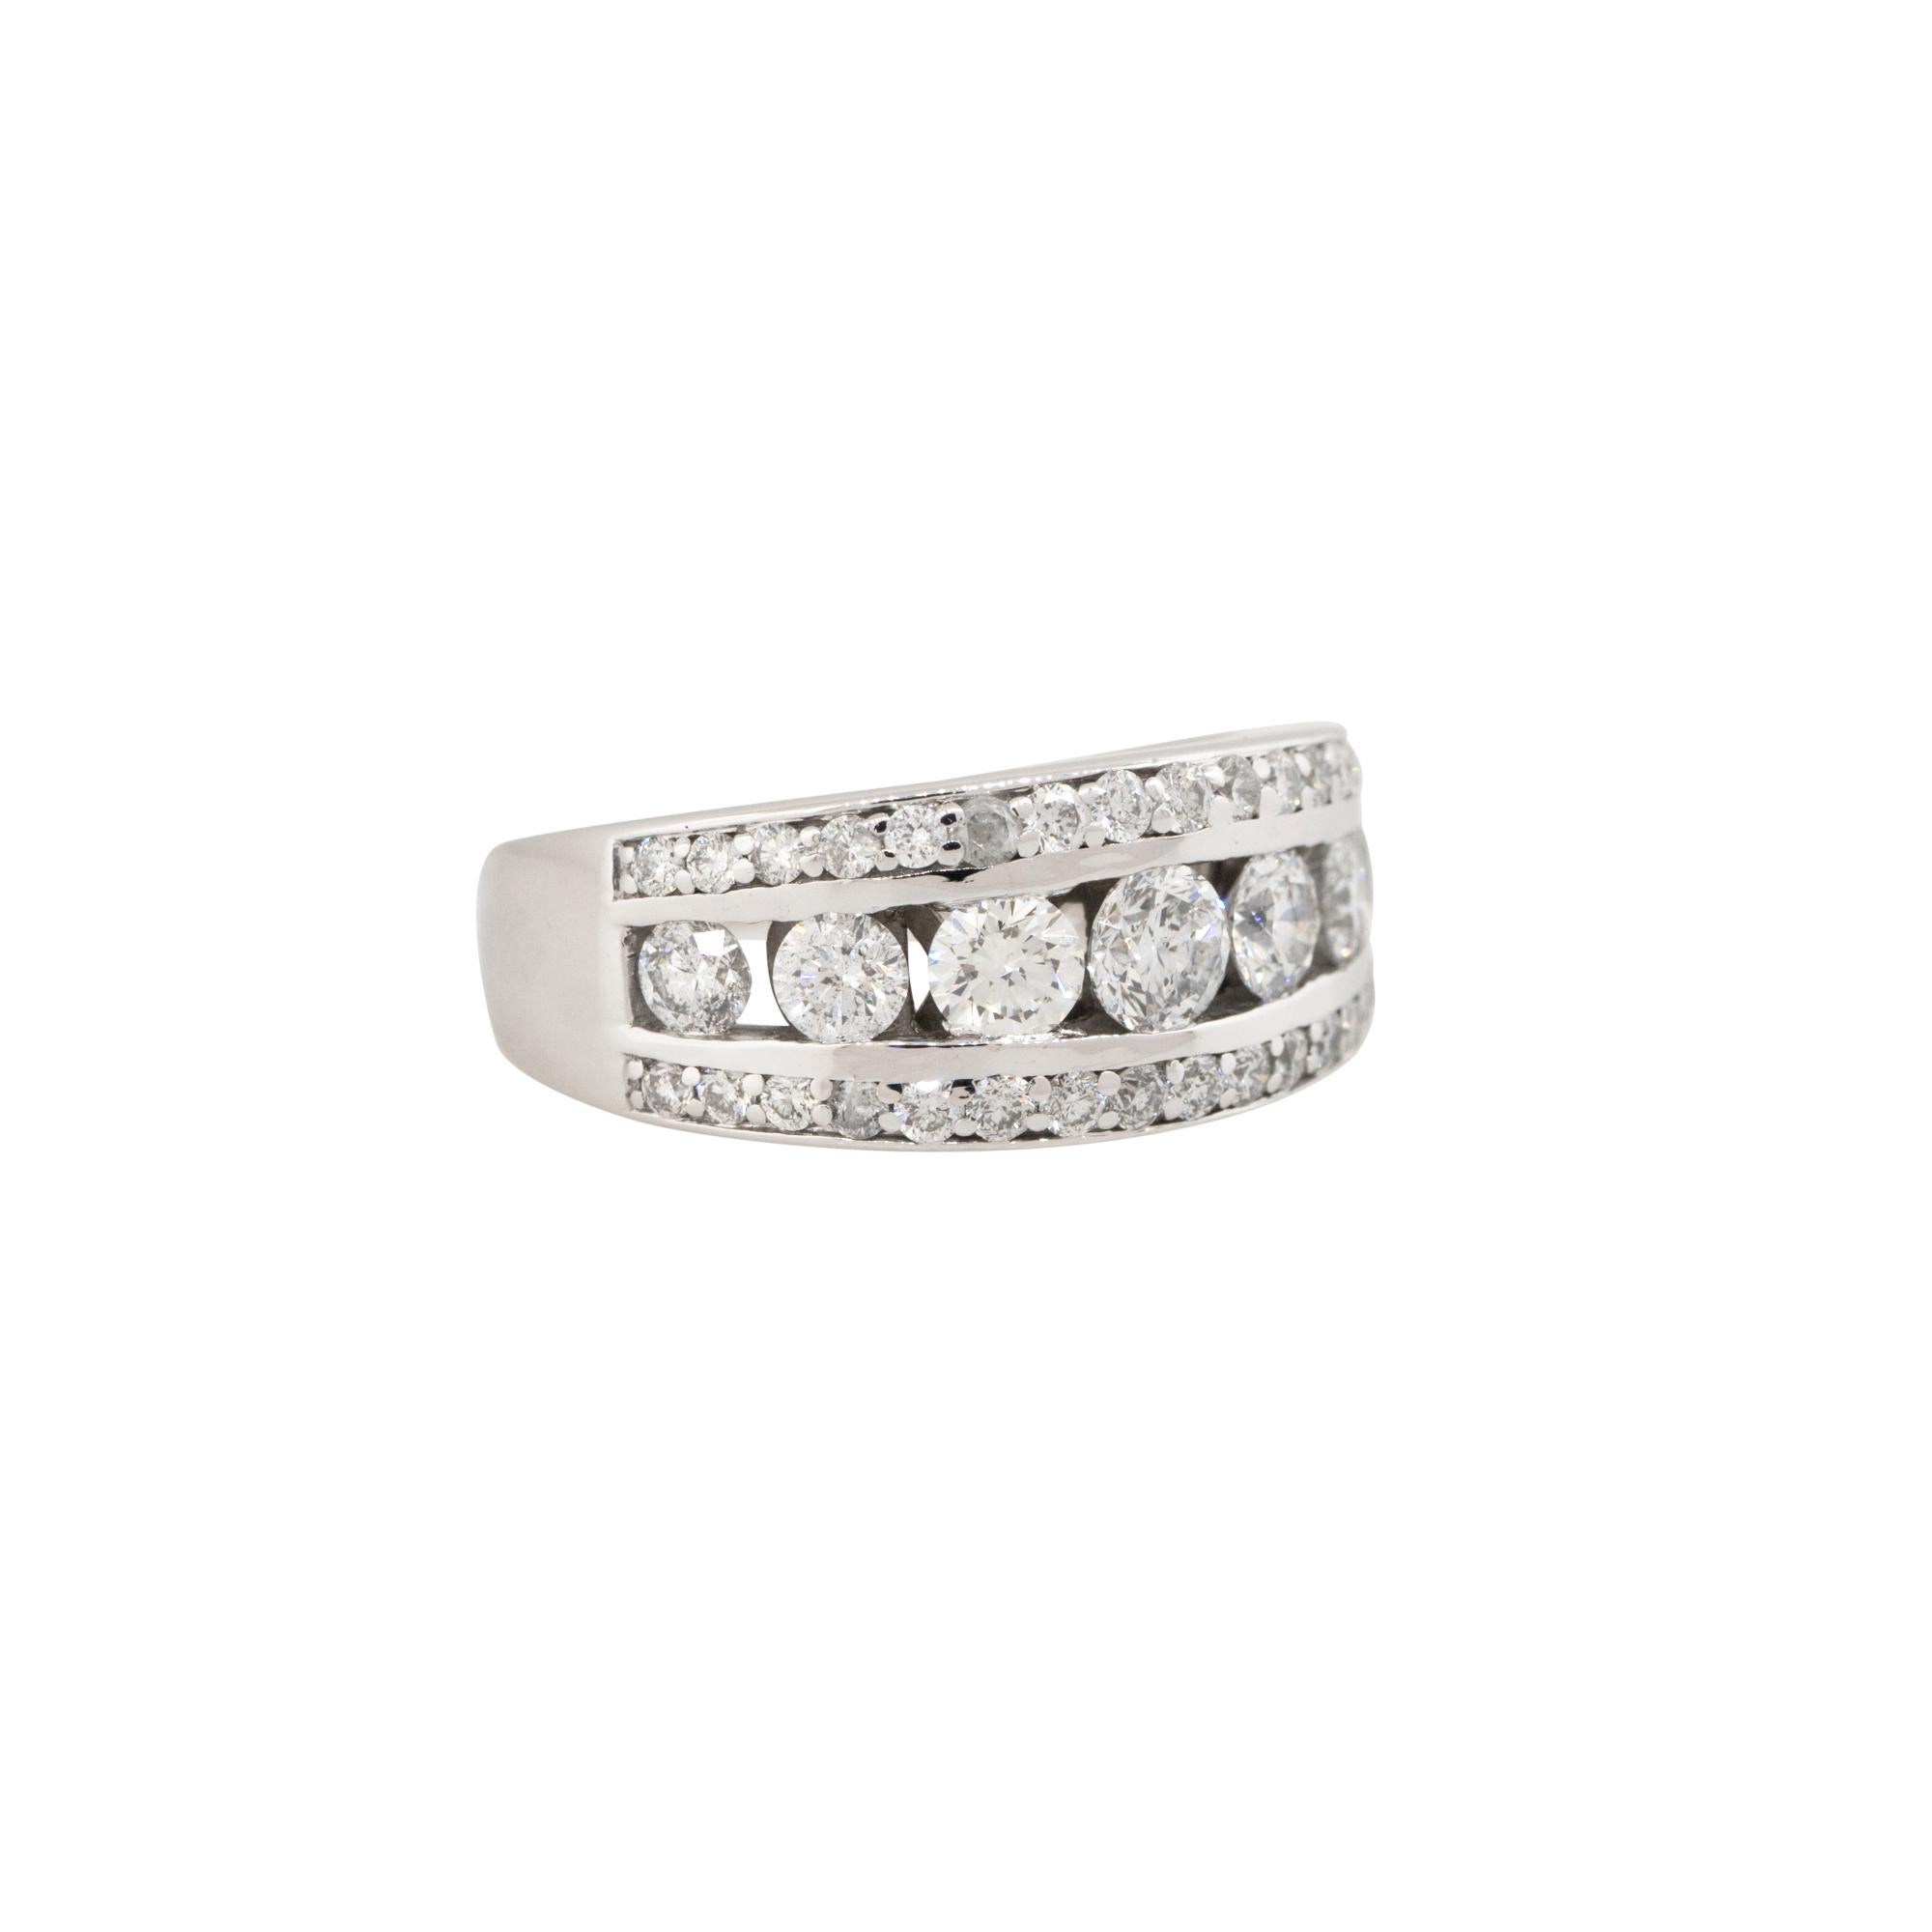 Round Cut 1.5 Carats Round Brilliant Diamond 3 Row Graduated Band 14 Karat In Stock For Sale